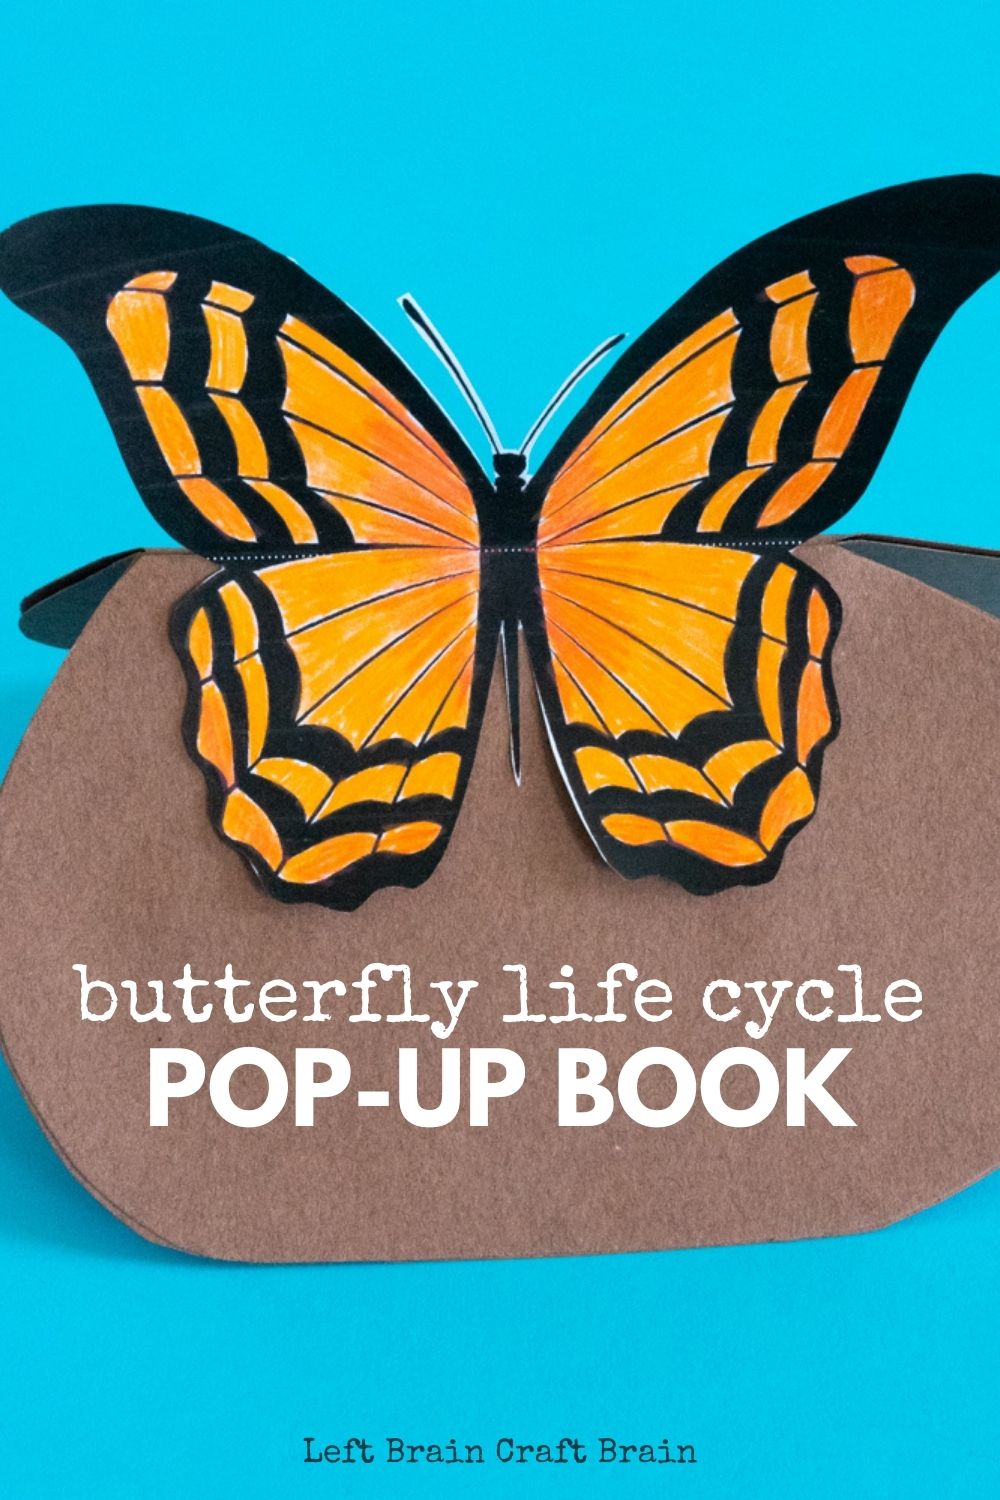 Learn about the butterfly life cycle with a fun pop-up book! It's a perfect STEAM activity for school or homeschool.